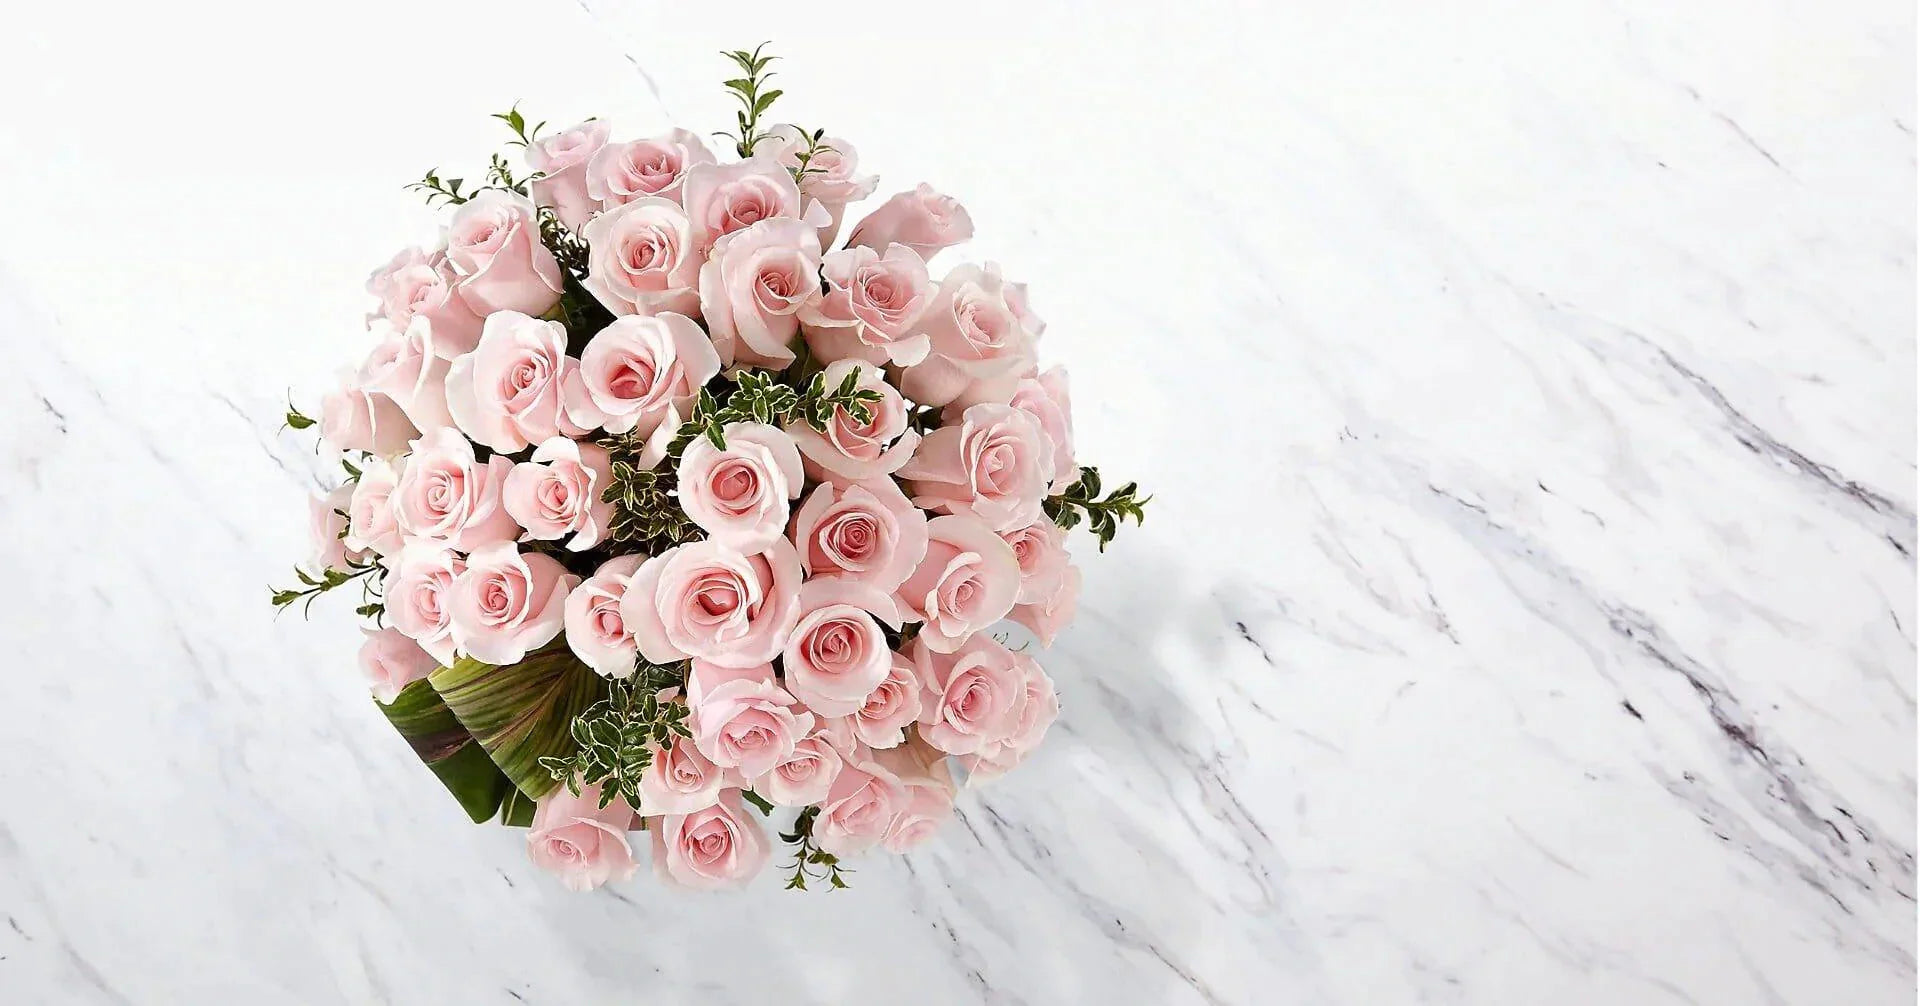 Delighted Luxury Rose Bouquet